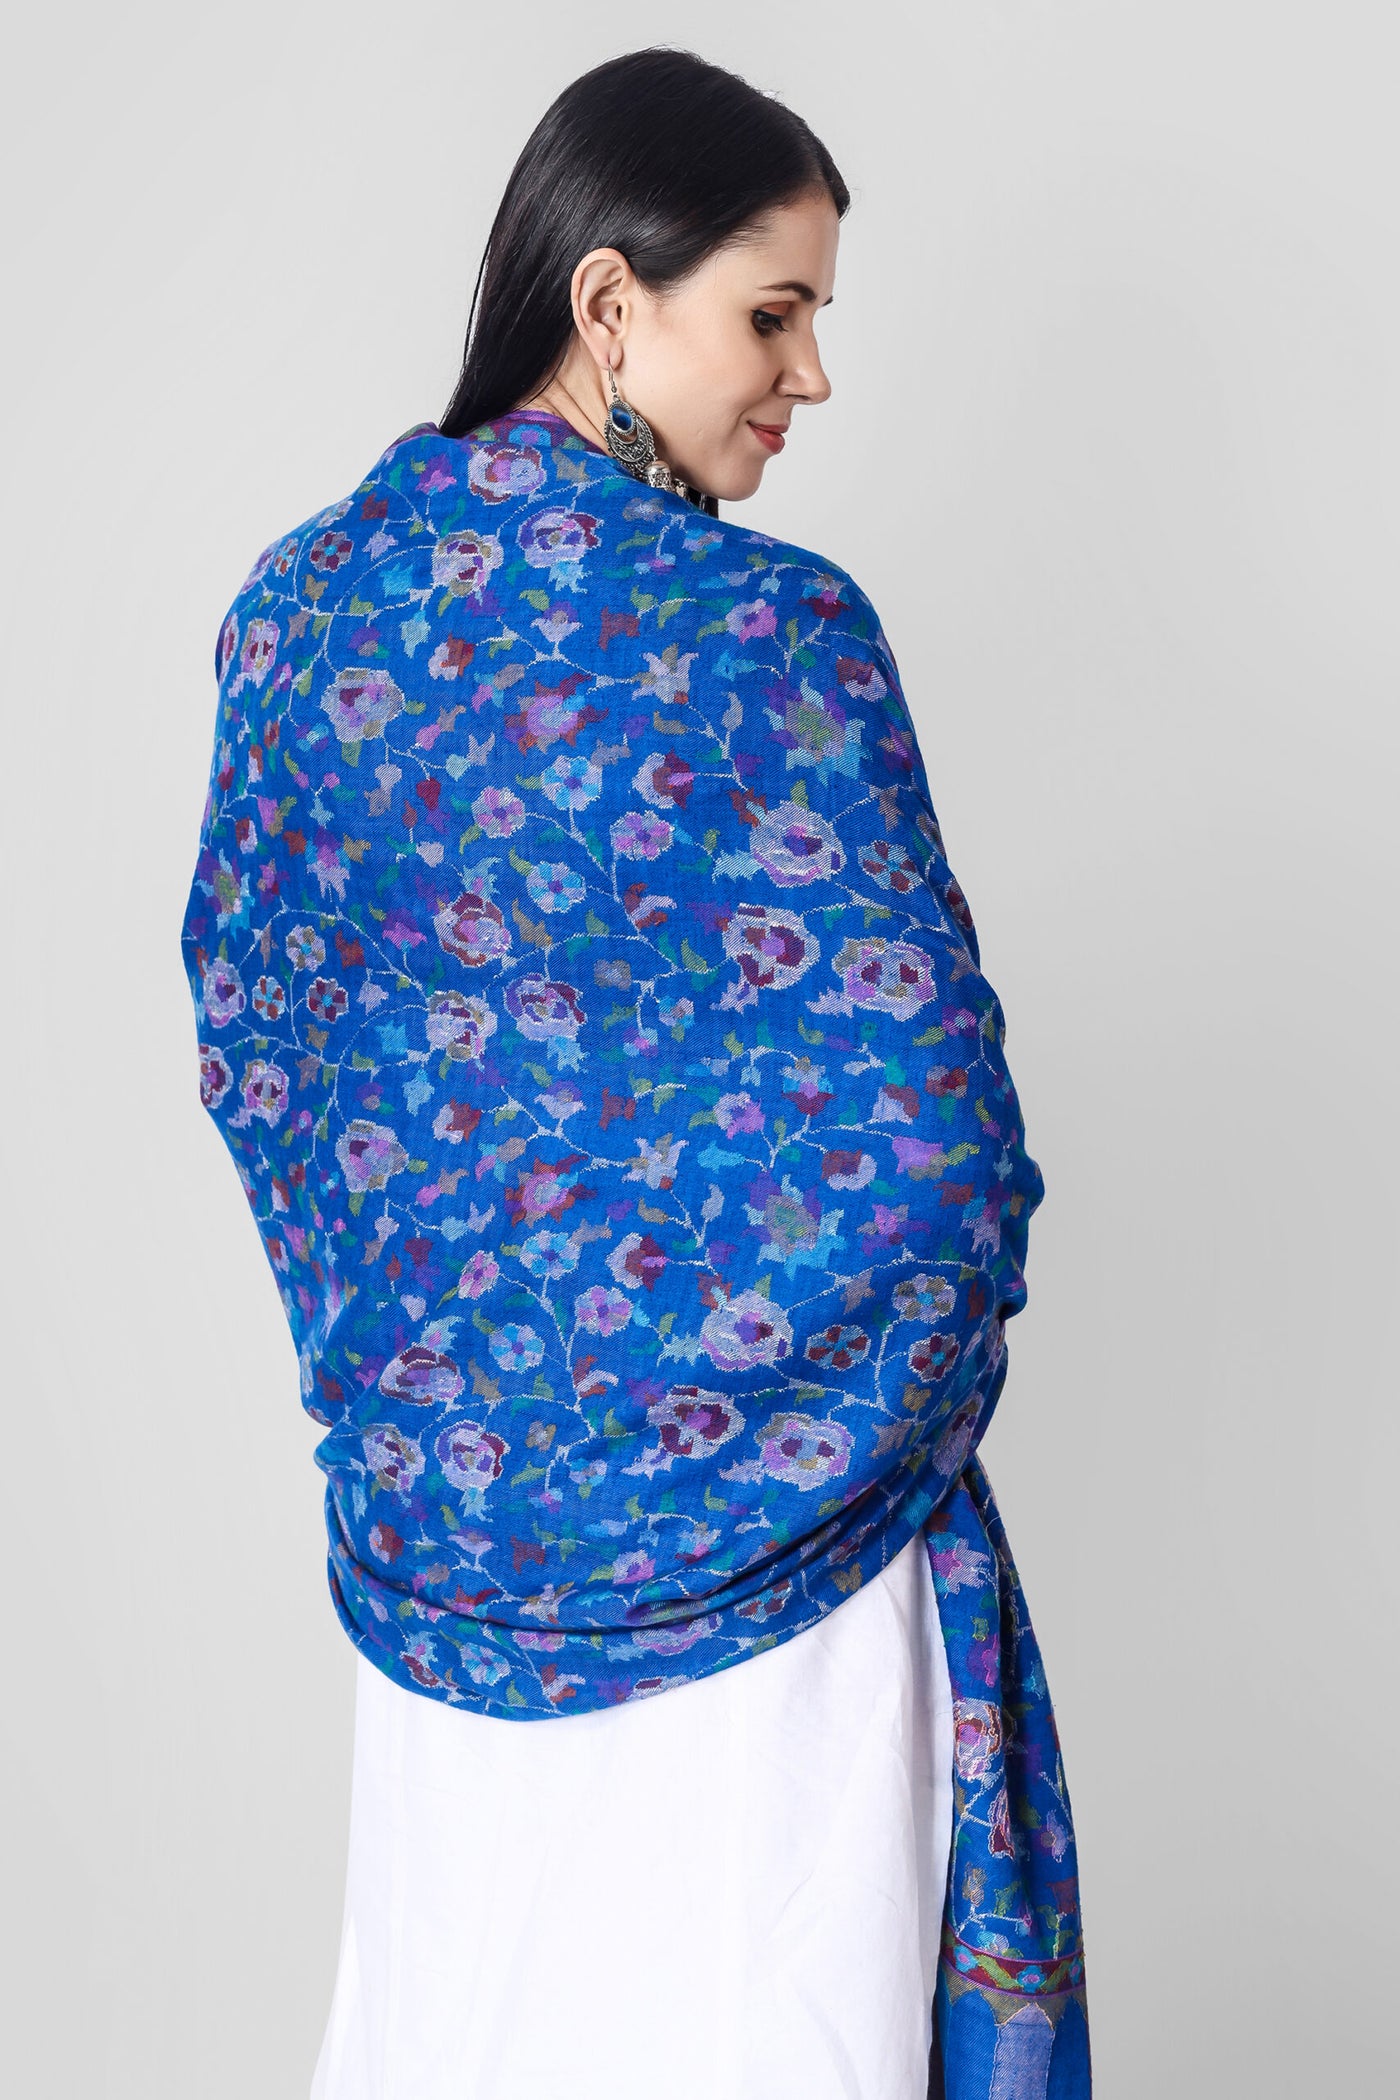 This elegant Blue Pashmina kani shawl features dancing florals and motifs in all the colors of nature skilled in the same splendid Kani weave. 